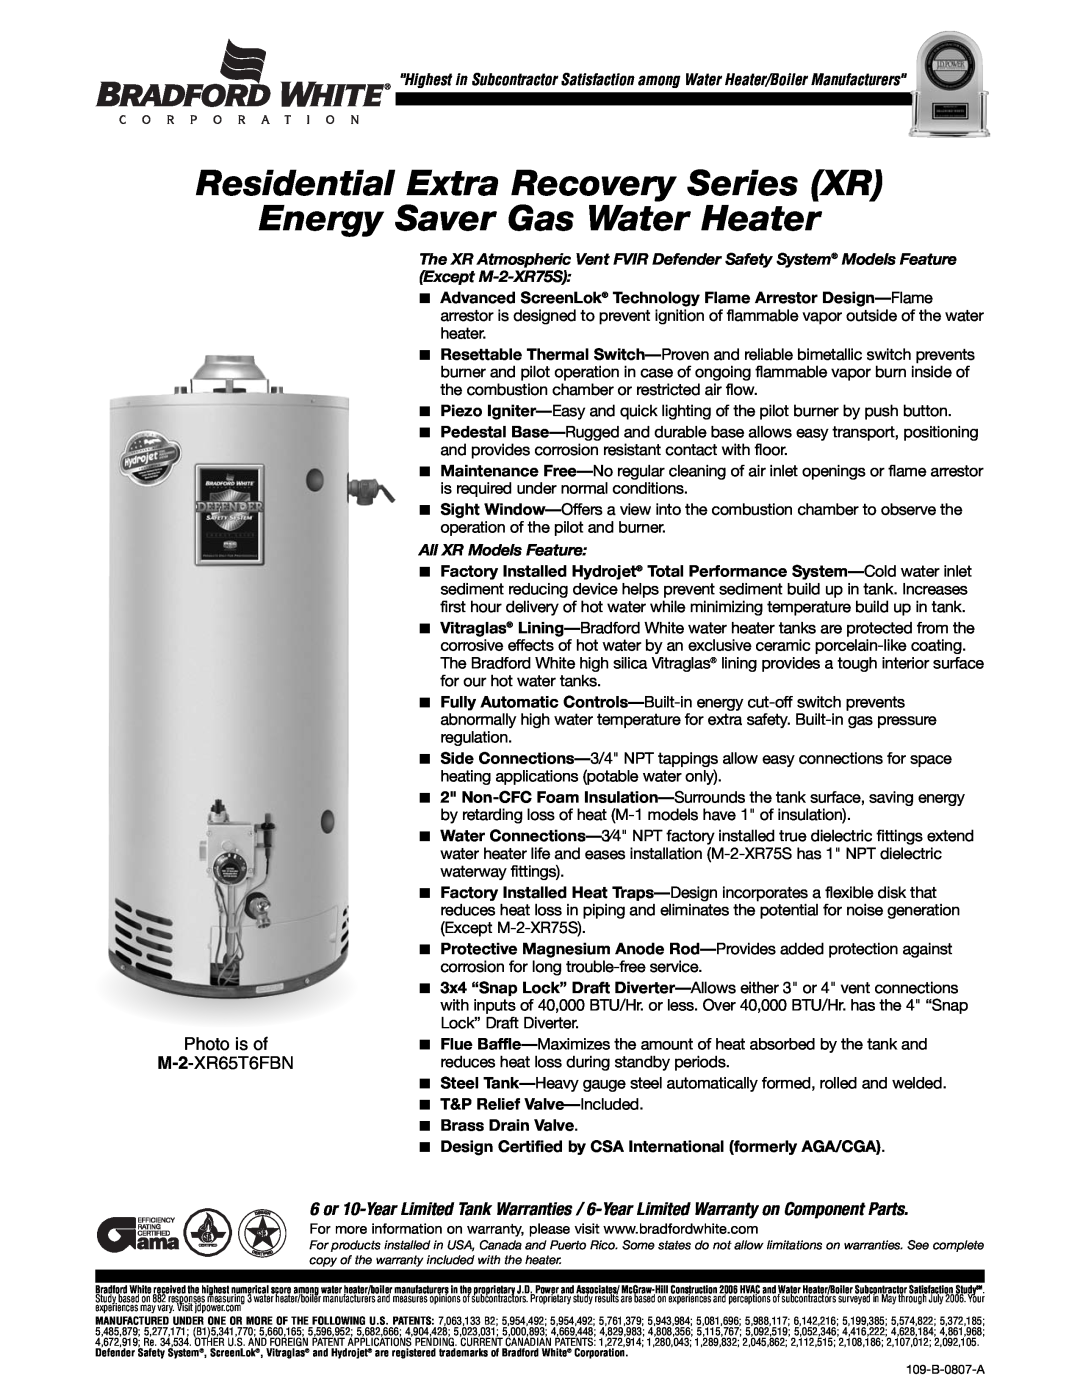 Bradford-White Corp M-2-XR75S warranty Residential Extra Recovery Series XR Energy Saver Gas Water Heater 